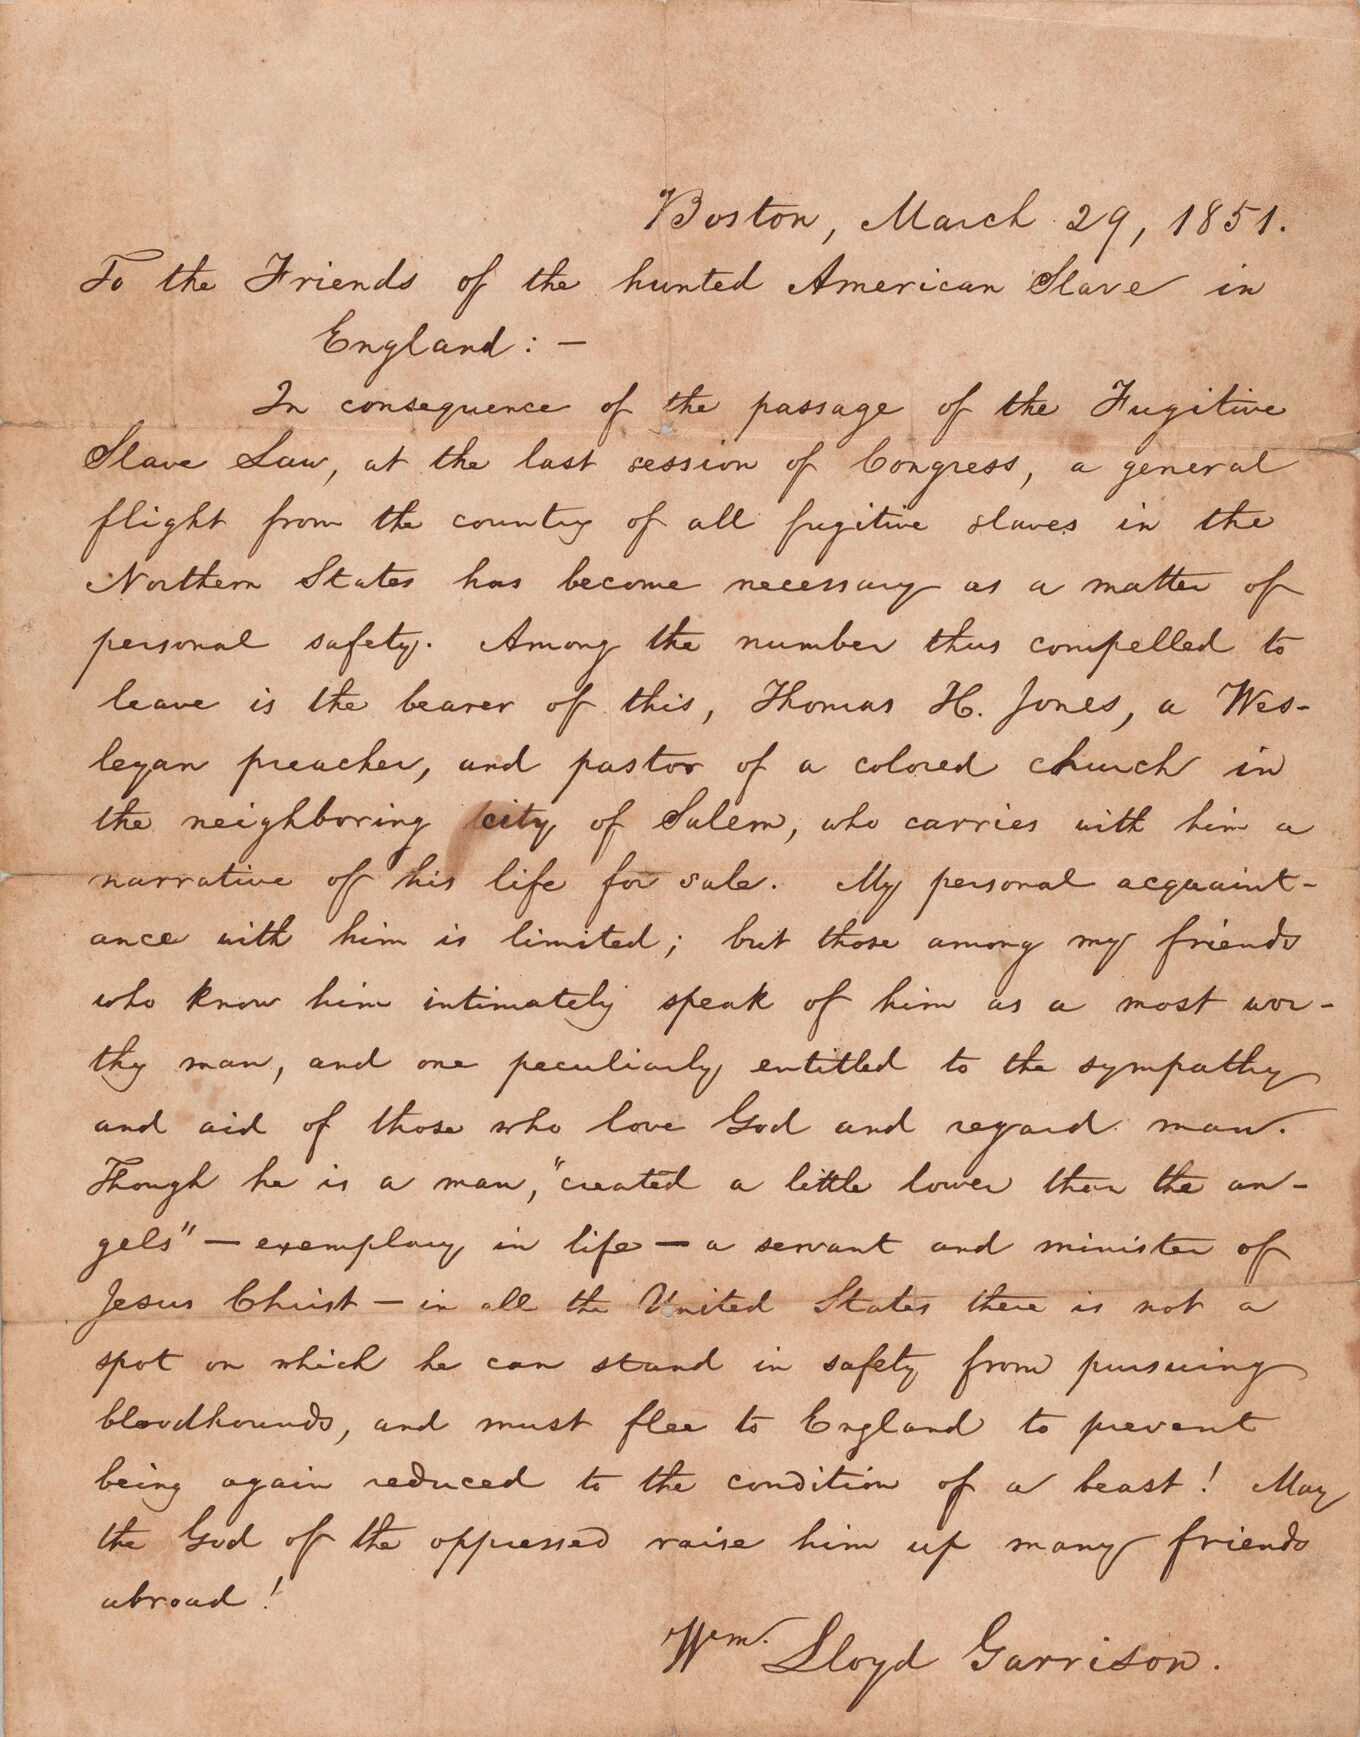 Letter of introduction written by William Lloyd Garrison on March 29,1851  for Rev. Thomas H. Jones who fled Salem, MA for England after the passage of the Fugitive Slave Act. The letter consists of a bi-folded sheet with handwriting in black ink on one quadrant. The letter is dated [Boston, March 29, 1851] at the top right and begins [To the Friends of the hunted American Slave in England: - ]. The letter introduces [Thomas H. Jones, a Wesleyan preacher, and pastor of a colored church in the neighboring city of Salem, who carries with him a narrative of his life for sale.]. It ends with [May the God of the oppressed raise him up many friends abroad!] and is signed [Wm. Lloyd Garrison] in the bottom right corner. There are no inscriptions or markings on the verso.